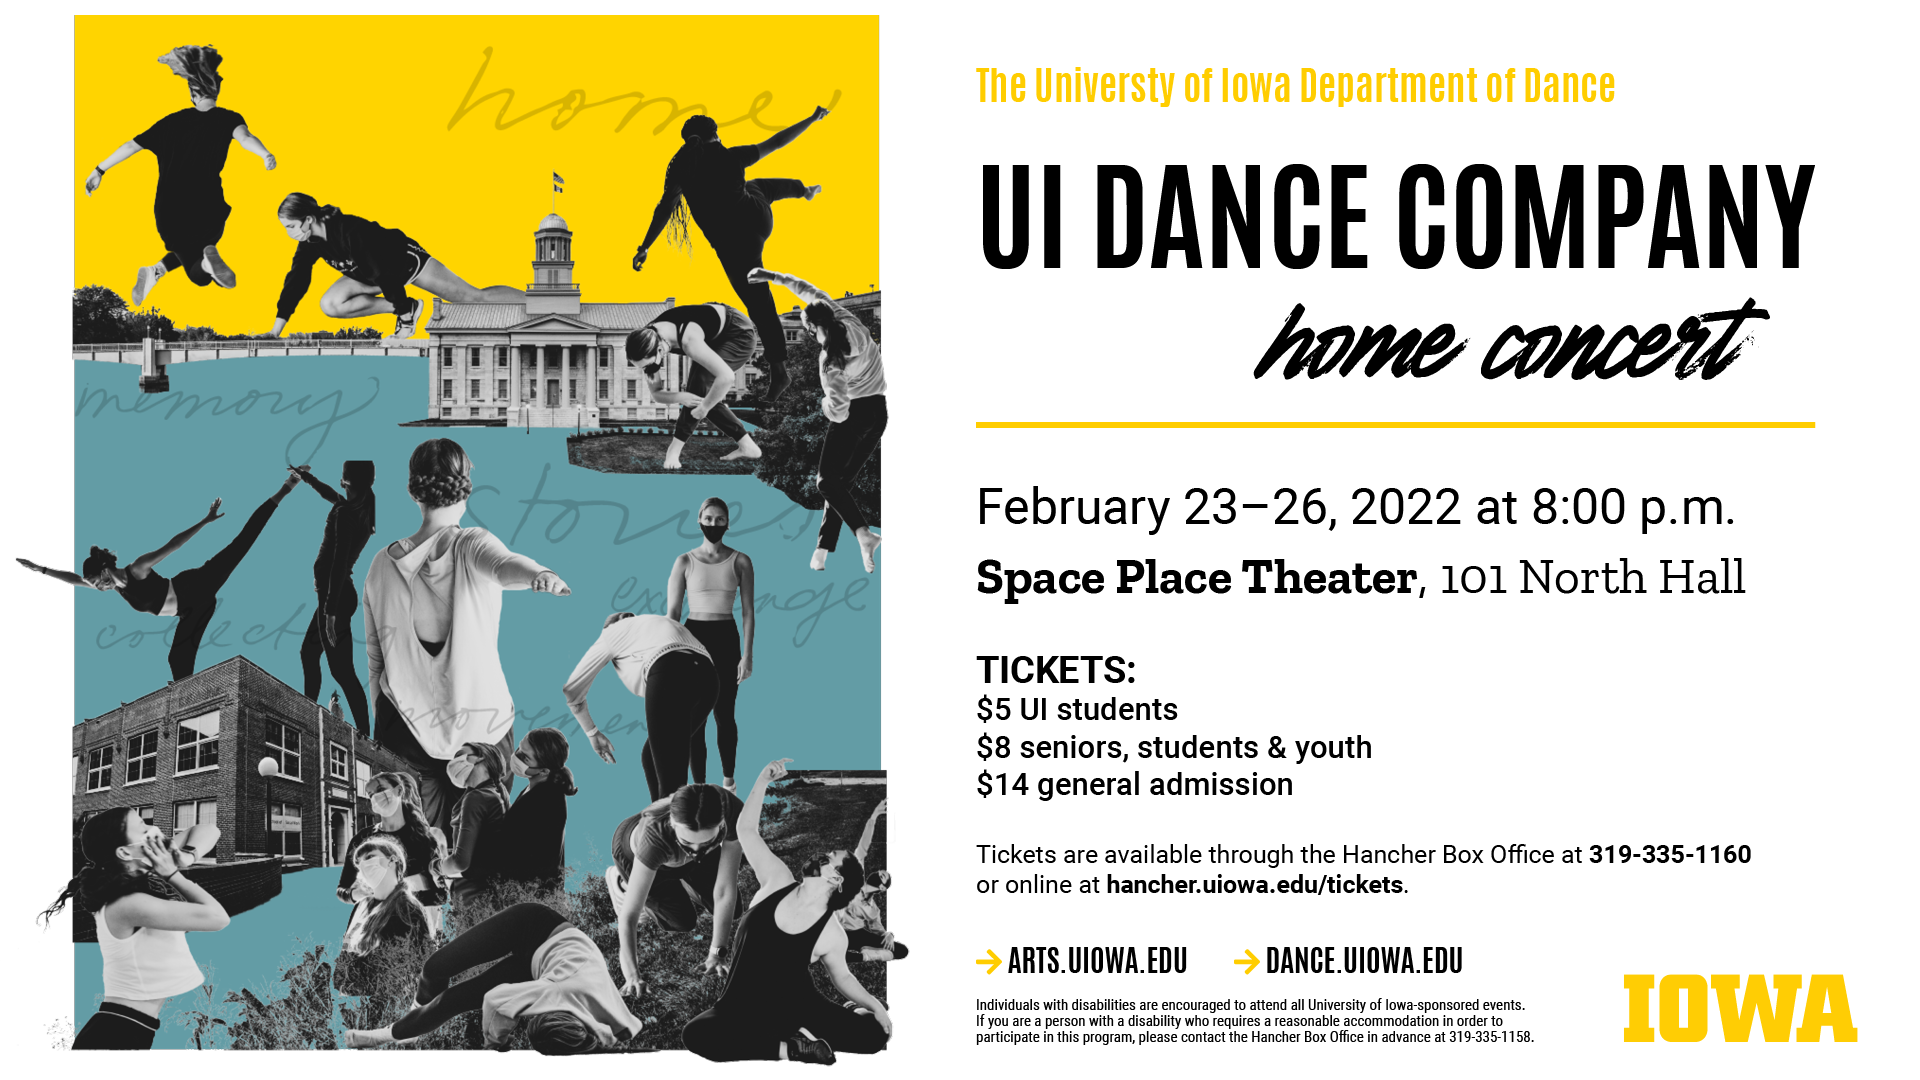 The University of Iowa Department of Dance UI Dance Company home concert February 23 - 26 at 8 p.m. Space Place Theater, 101 North Hall. Tickets: $5 UI students $8 seniors, students, & youth $14 general admission. Tickets are available through the Hancher Box Office at 319-335-1160 or online at hancher.uiowa.edu/tickets. arts.uiowa.edu dance.uiowa.edu